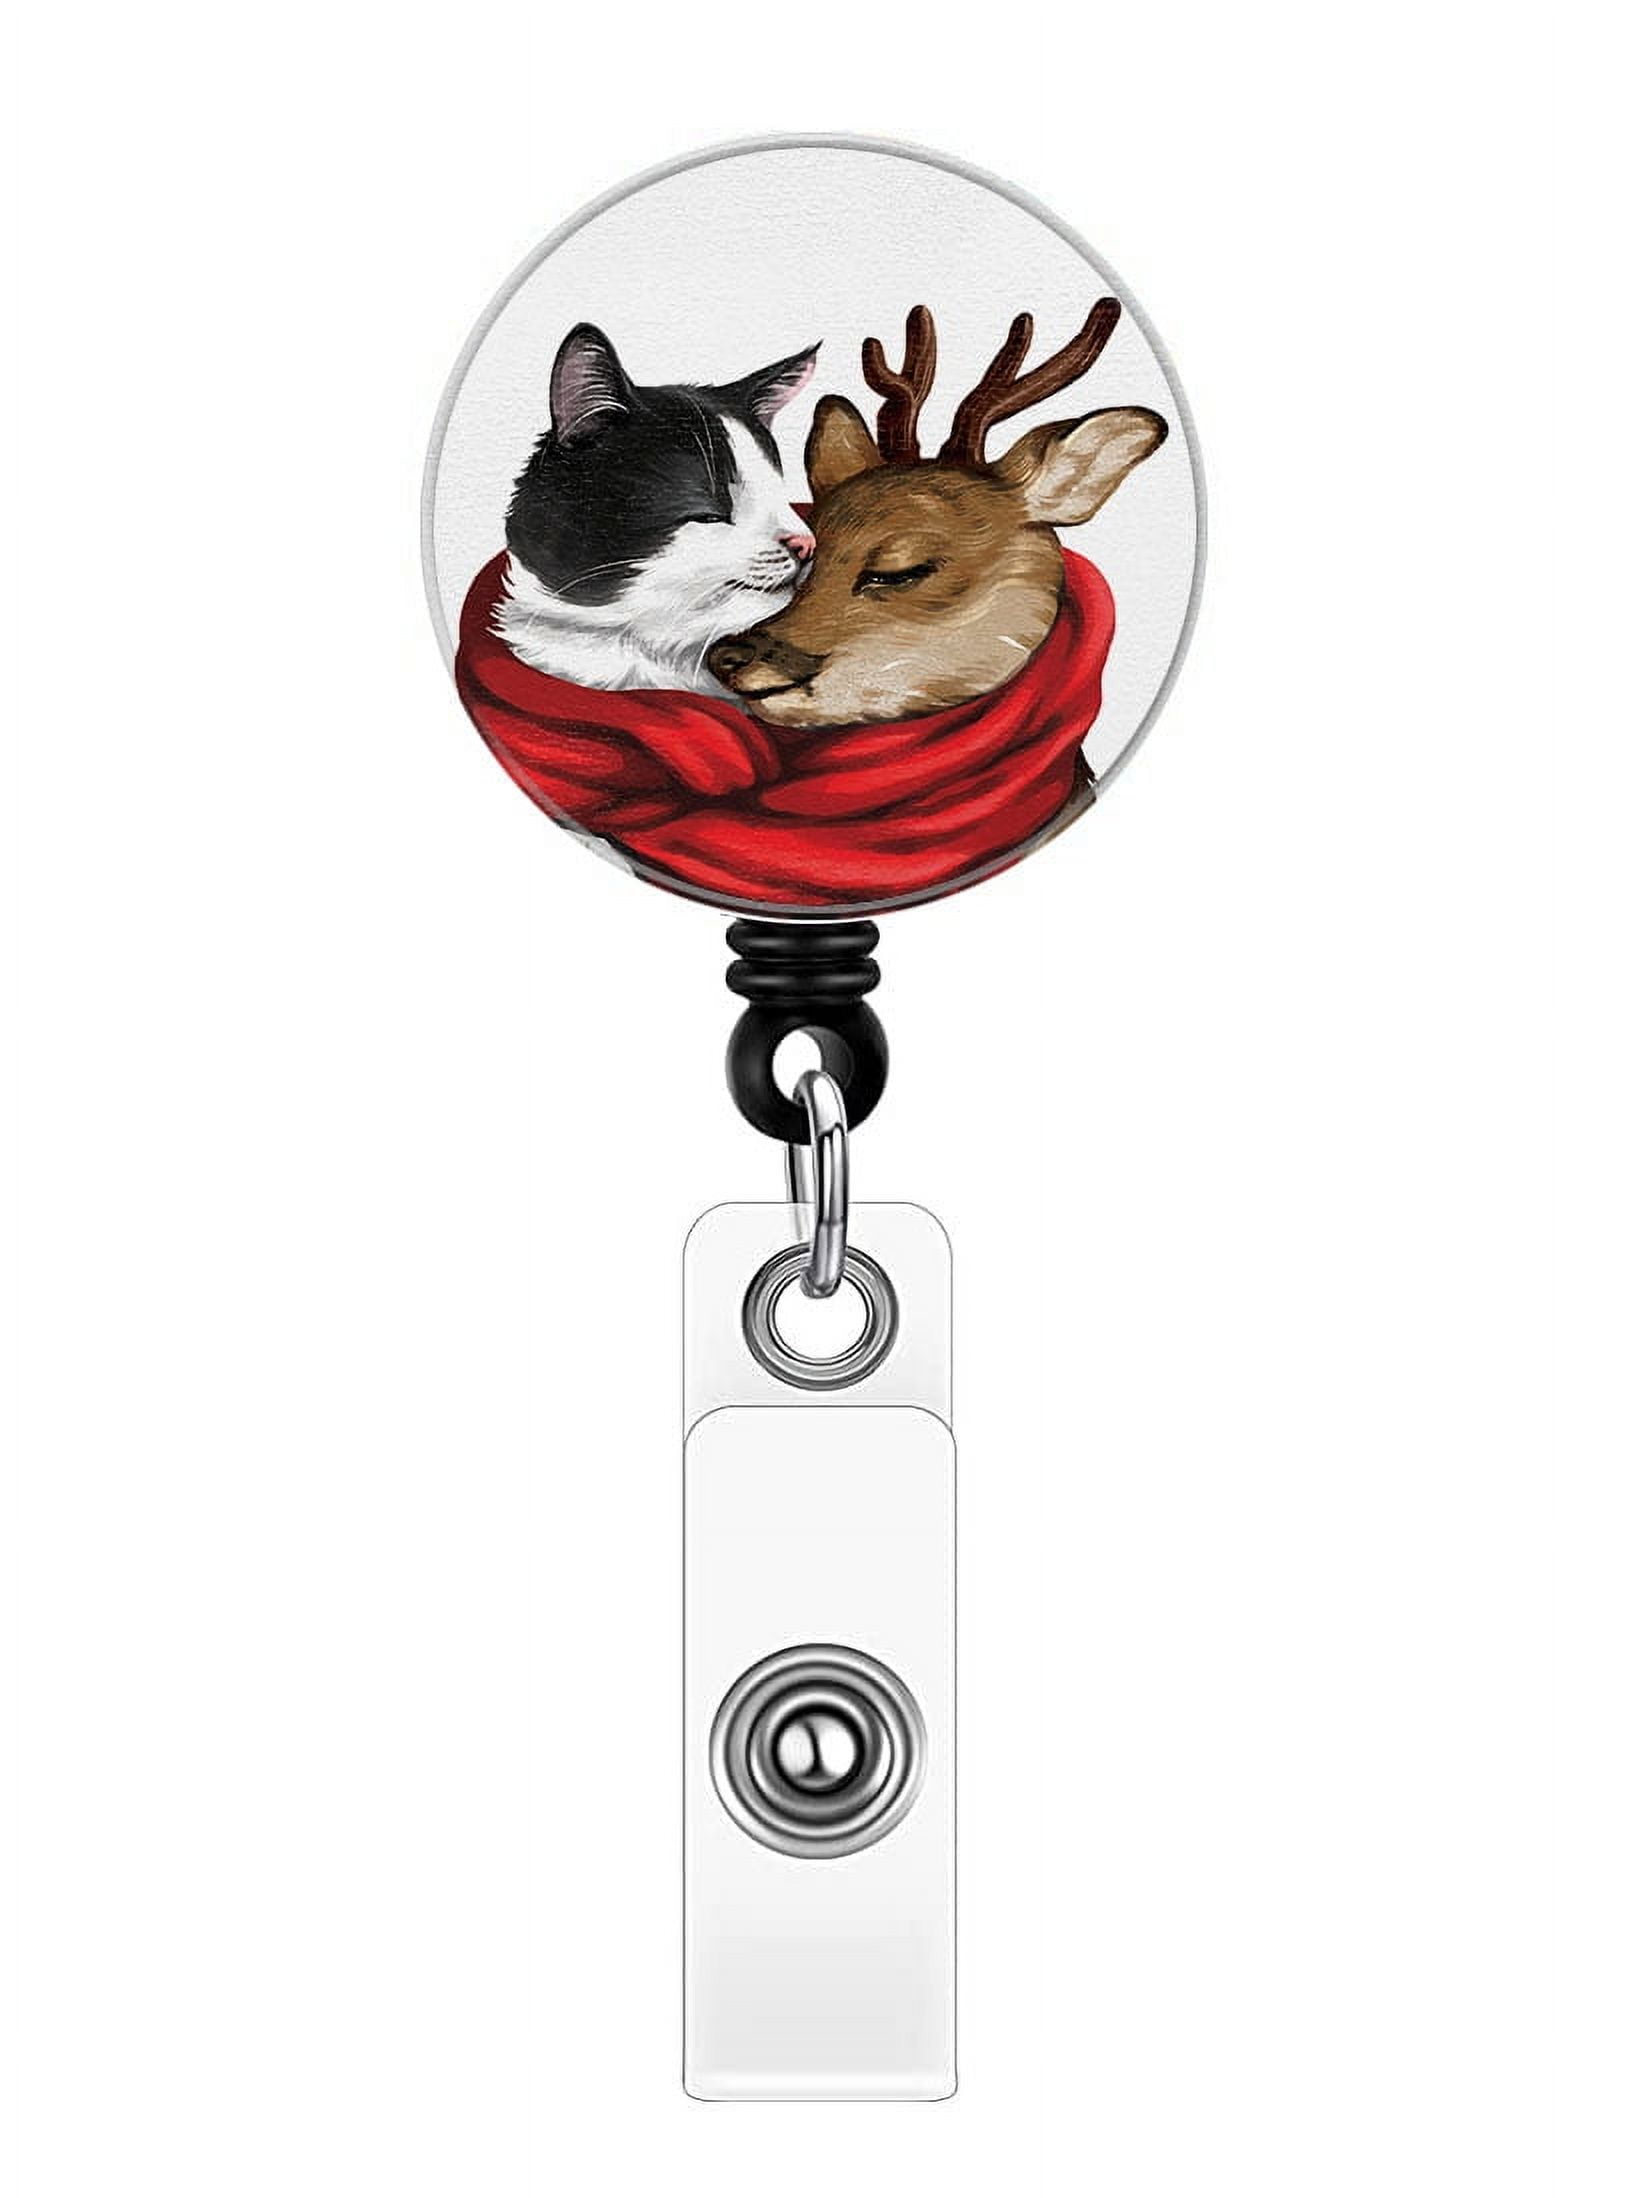 WIRESTER Retractable Badge Reels with Alligator Swivel Clip & Plastic Card  Holder Strap, Round ID Badge Holders for Students, Teachers, Office Workers  - Deer Rabbit Nose Touch 